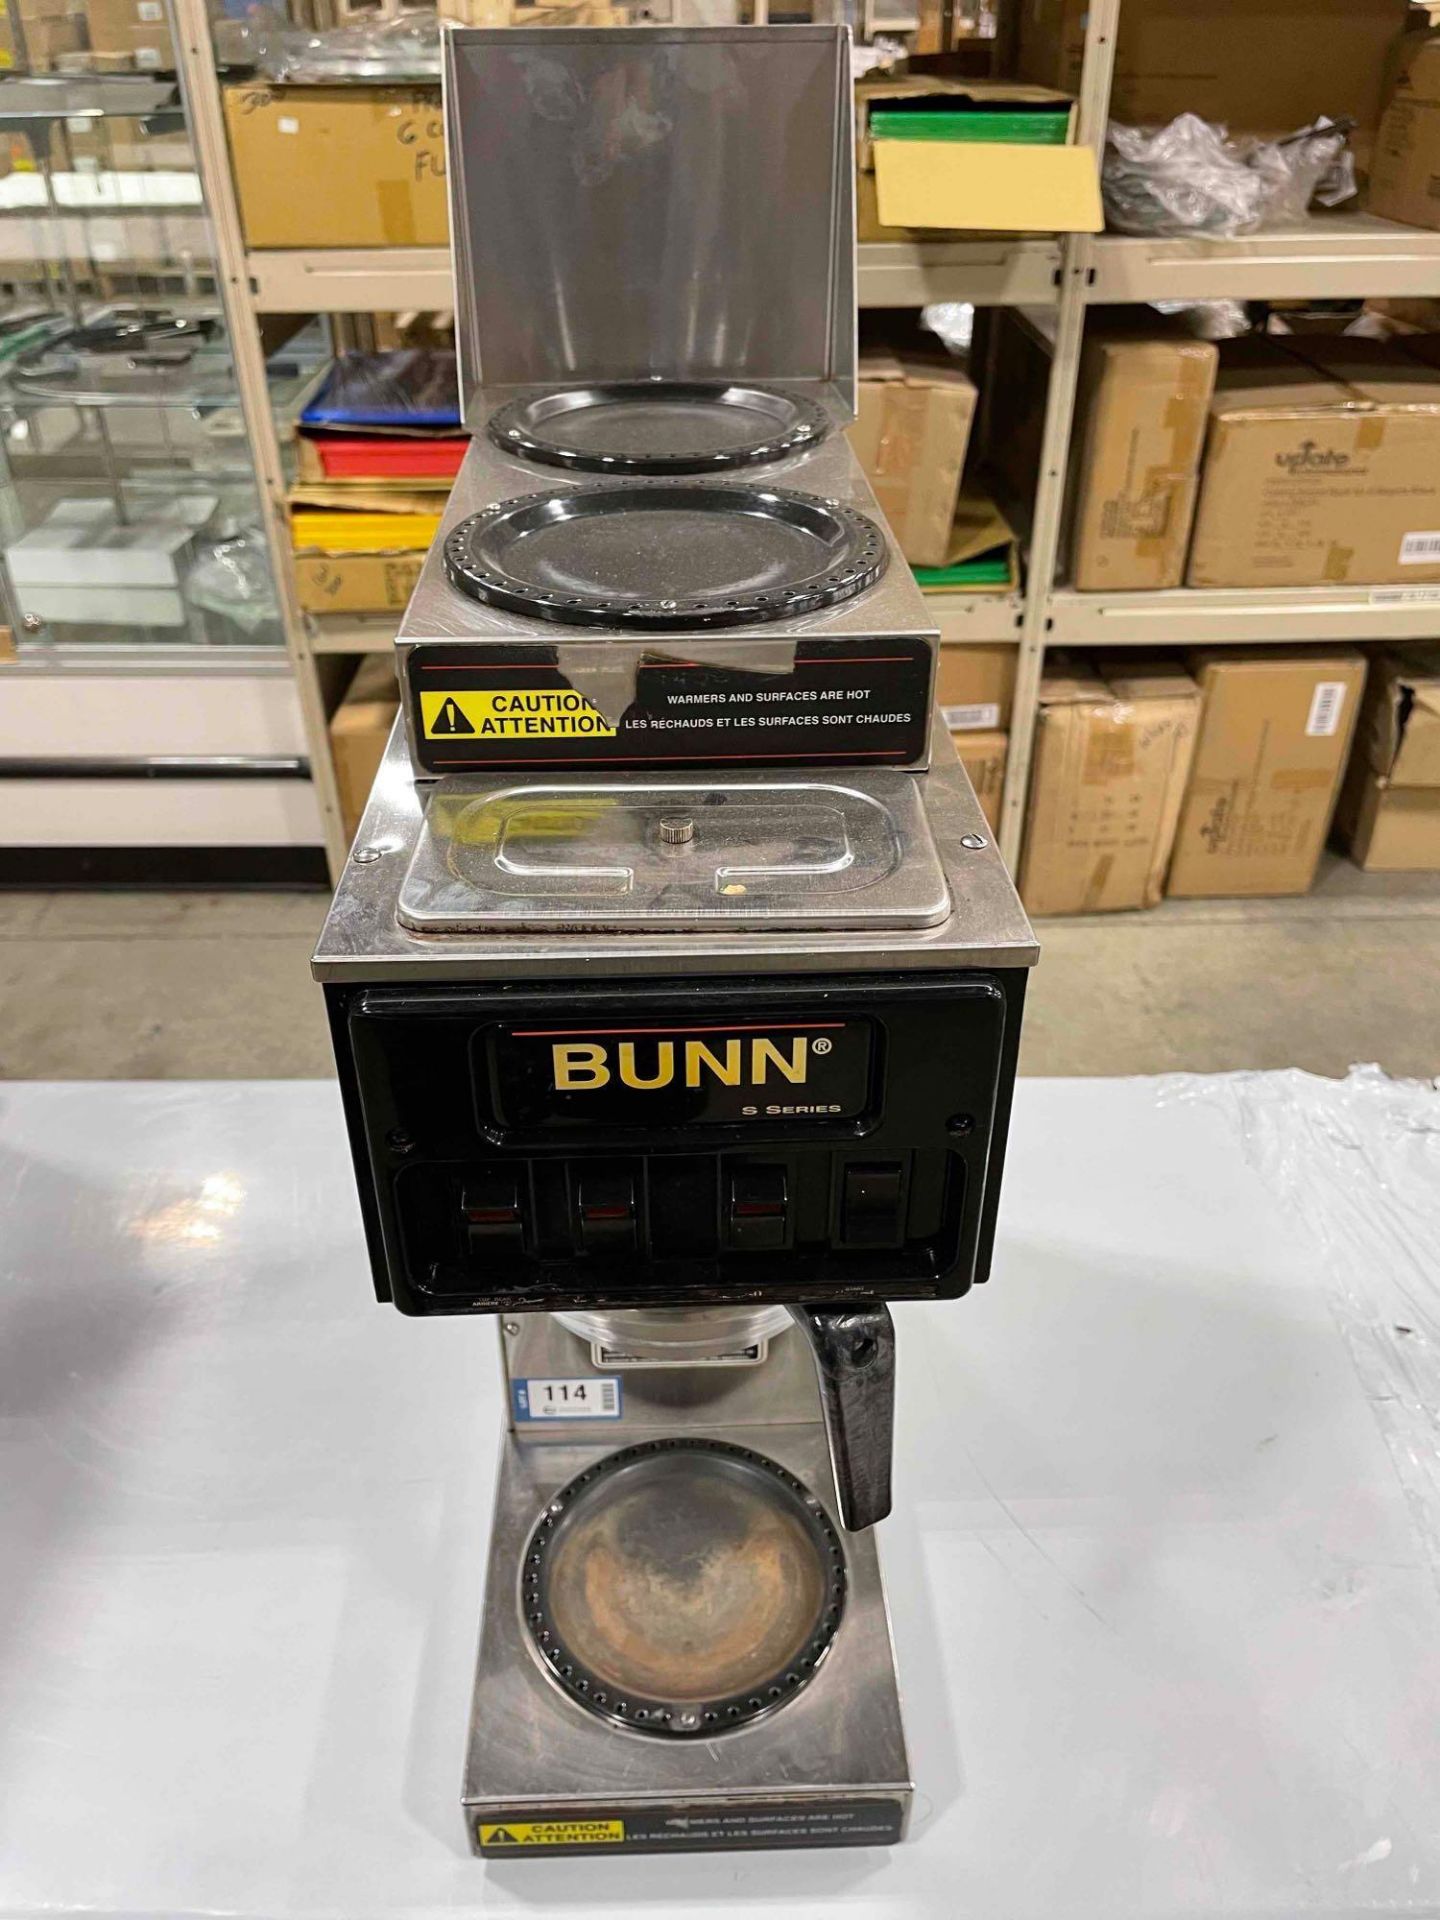 BUNN ST-35 COFFEE BREWER WITH 3 WARMERS - Image 2 of 7